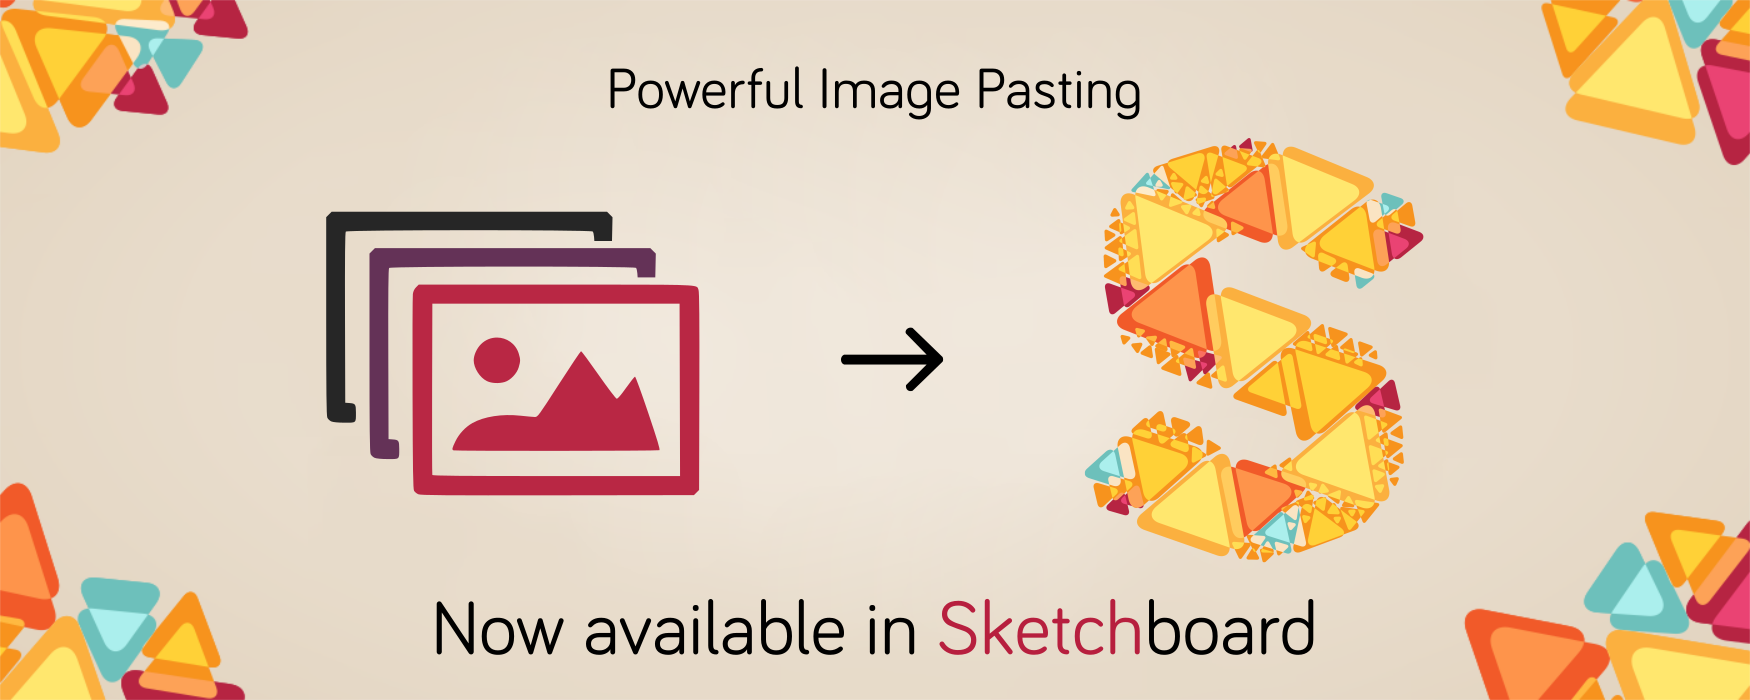 Powerful image pasting now available in Sketchboard